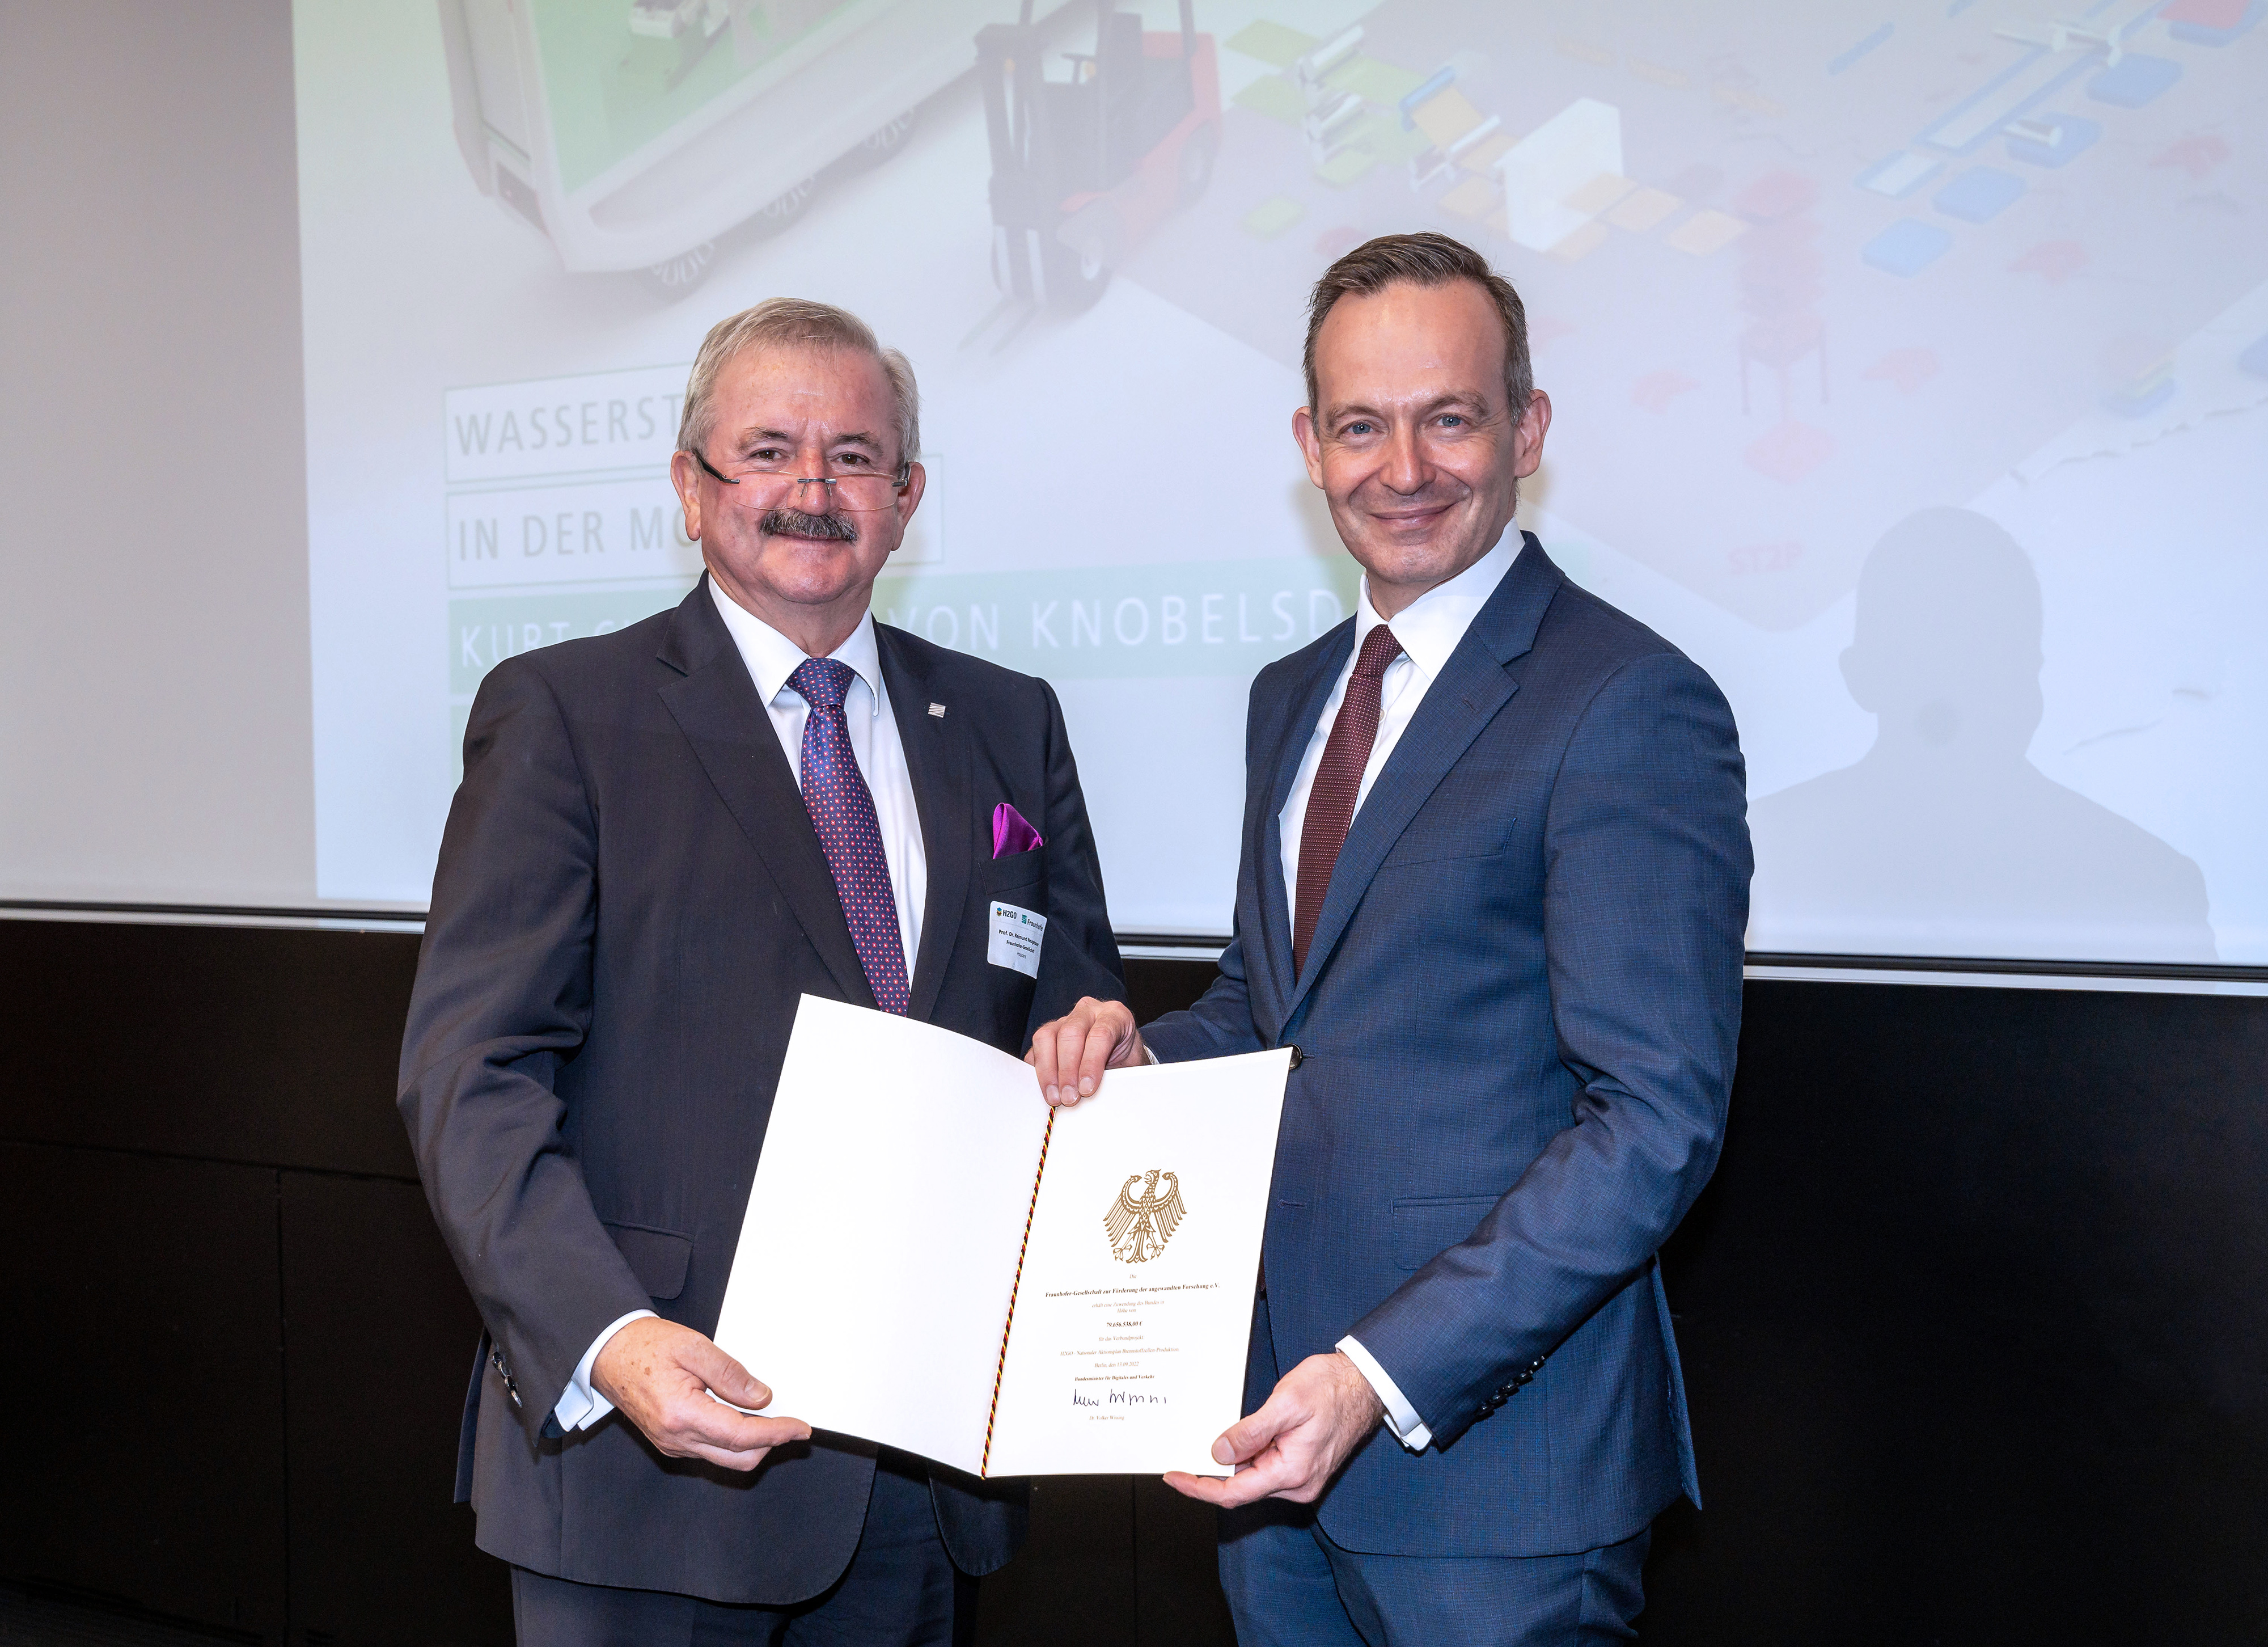 Federal Minister for Transport Dr. Volker Wissing handing over the funding decision of about 80 million euros   to Prof. Reimund Neugebauer, President of Fraunhofer-Gesellschaft.